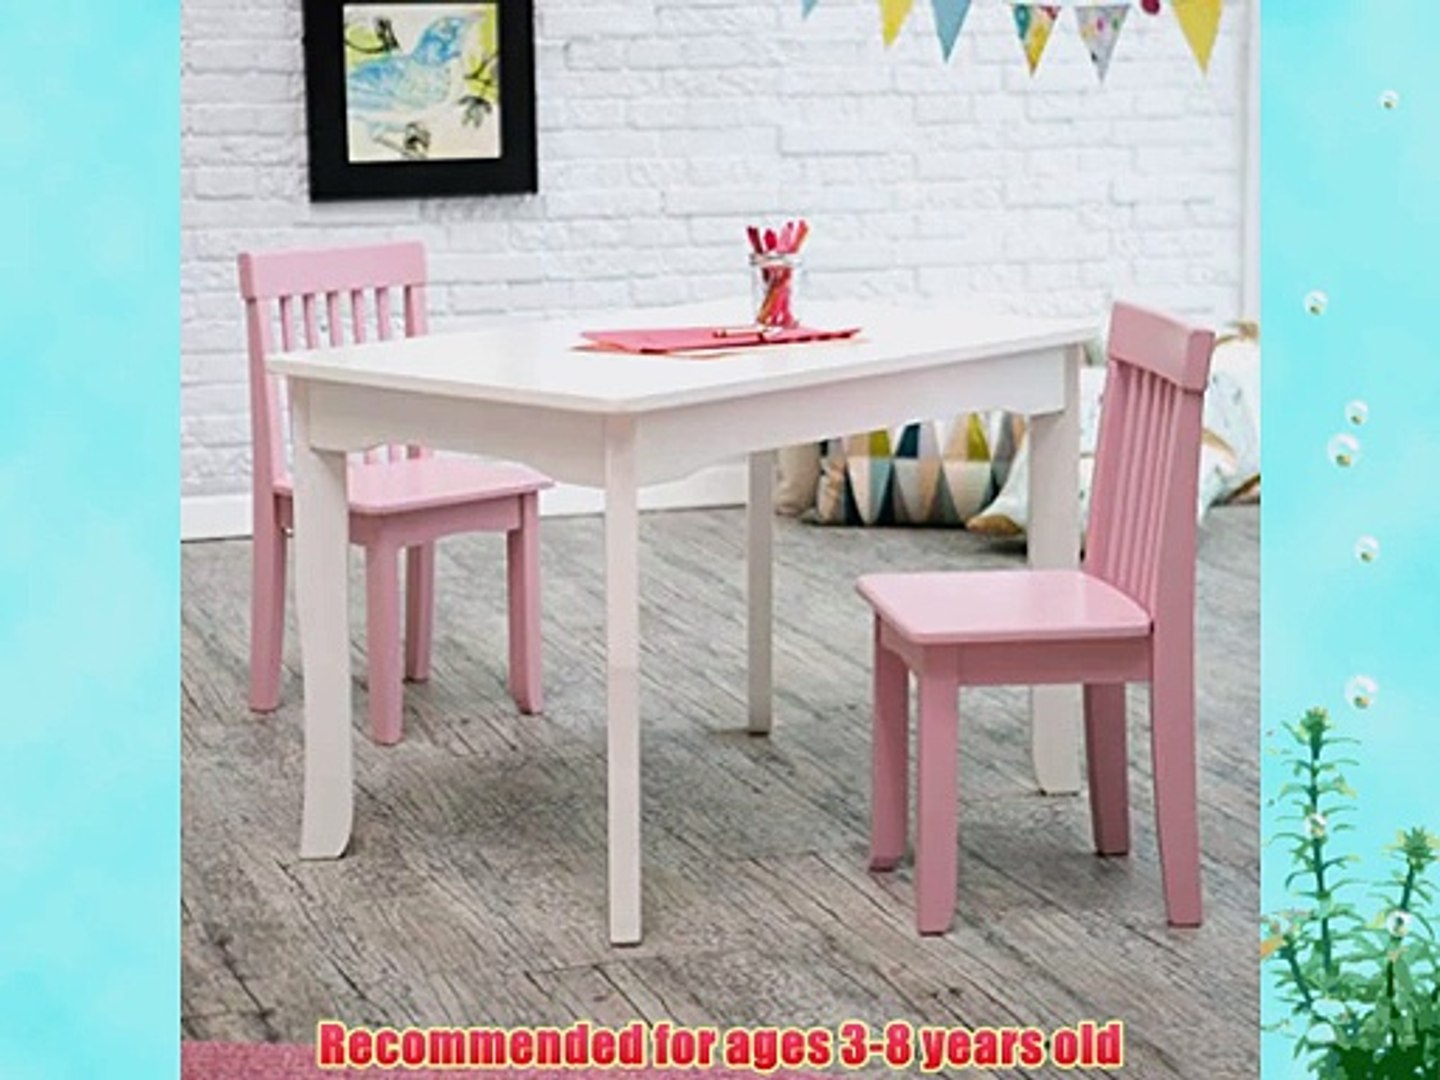 Lipper Lipper Mystic Table And Chair Set Pink Pink Video